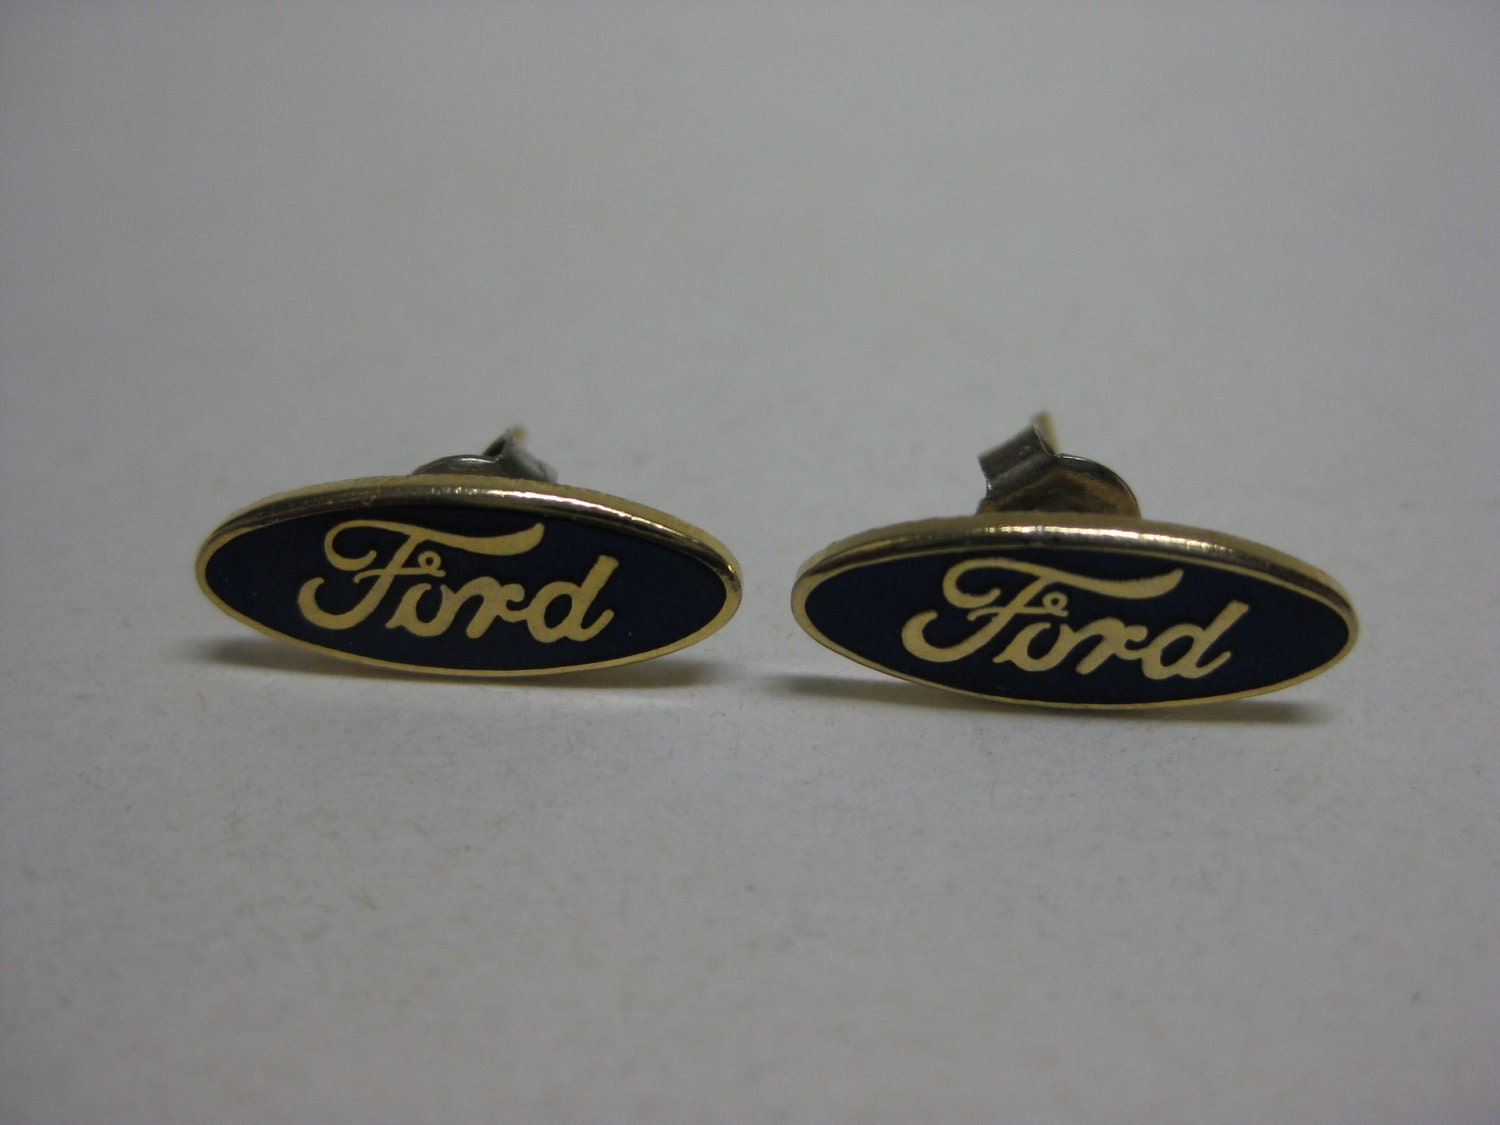 Ford and gold rings #10